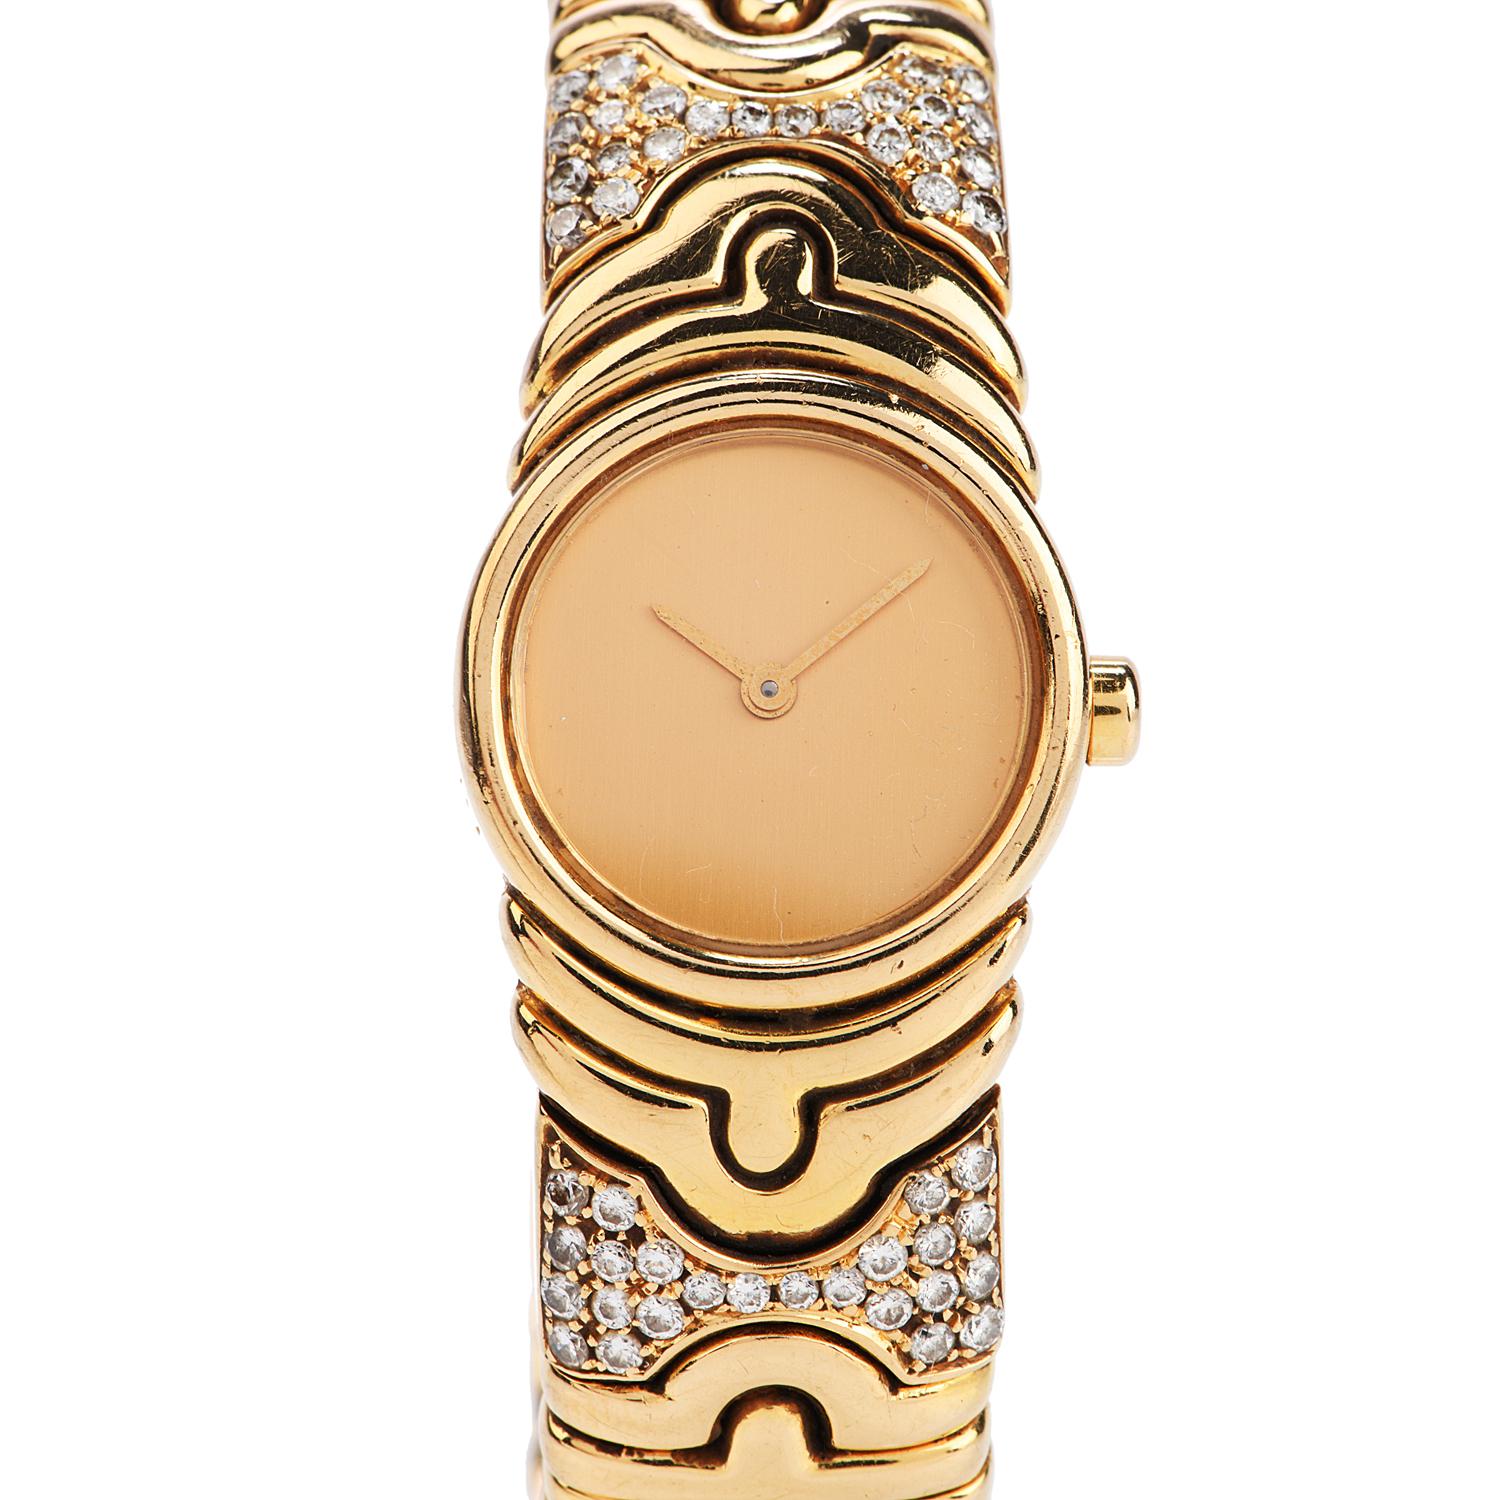 Ladies 18k yellow gold and diamond Parentesi bangle bracelet watch by Bvlgari. This stylis Bulgari ladies watch of unique feminine appeal is adorned on the bangle bracelet with  approx 2.50 carats of finest quality original factory set brilliant-cut